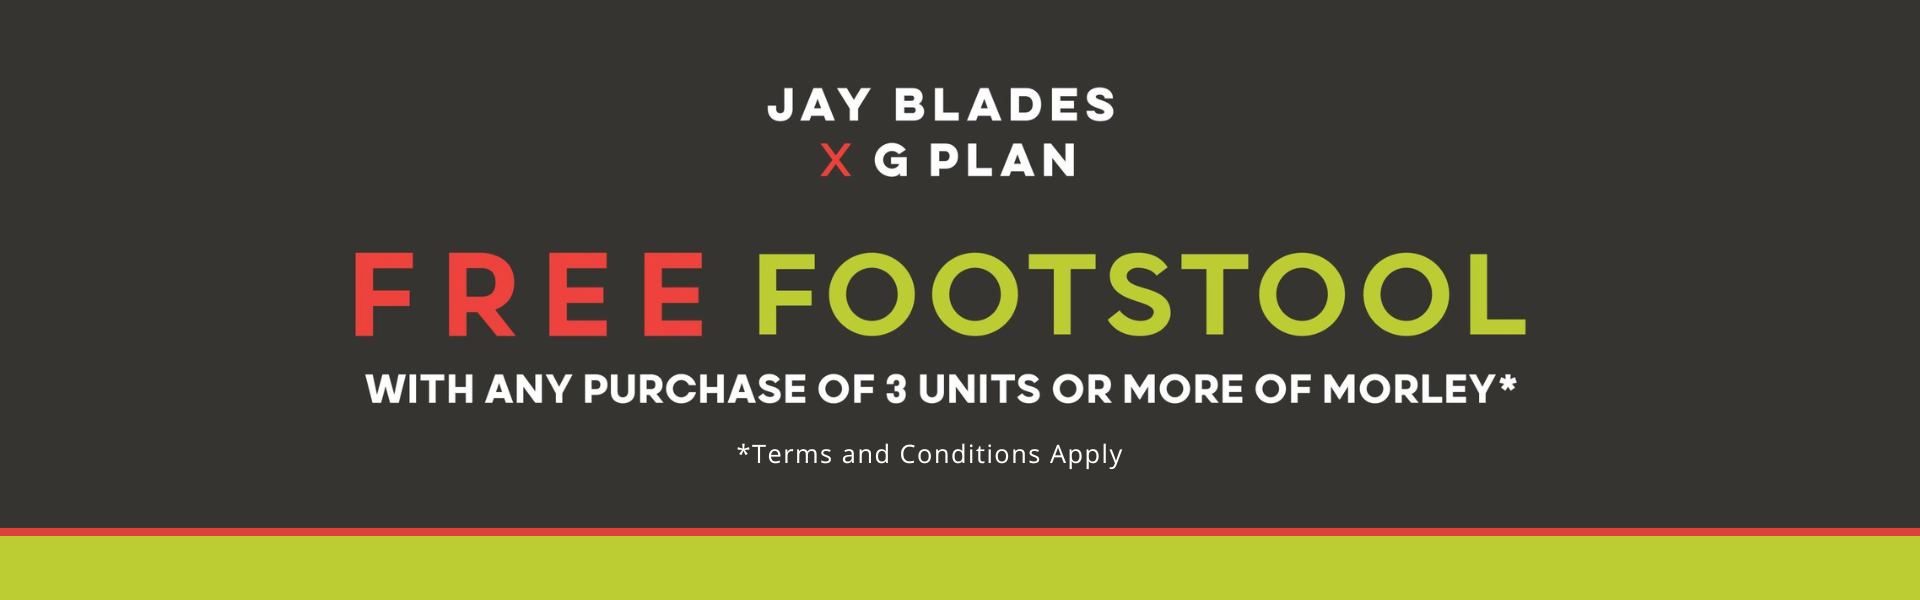 Jay Blades Free Footstool Landing Page Banner